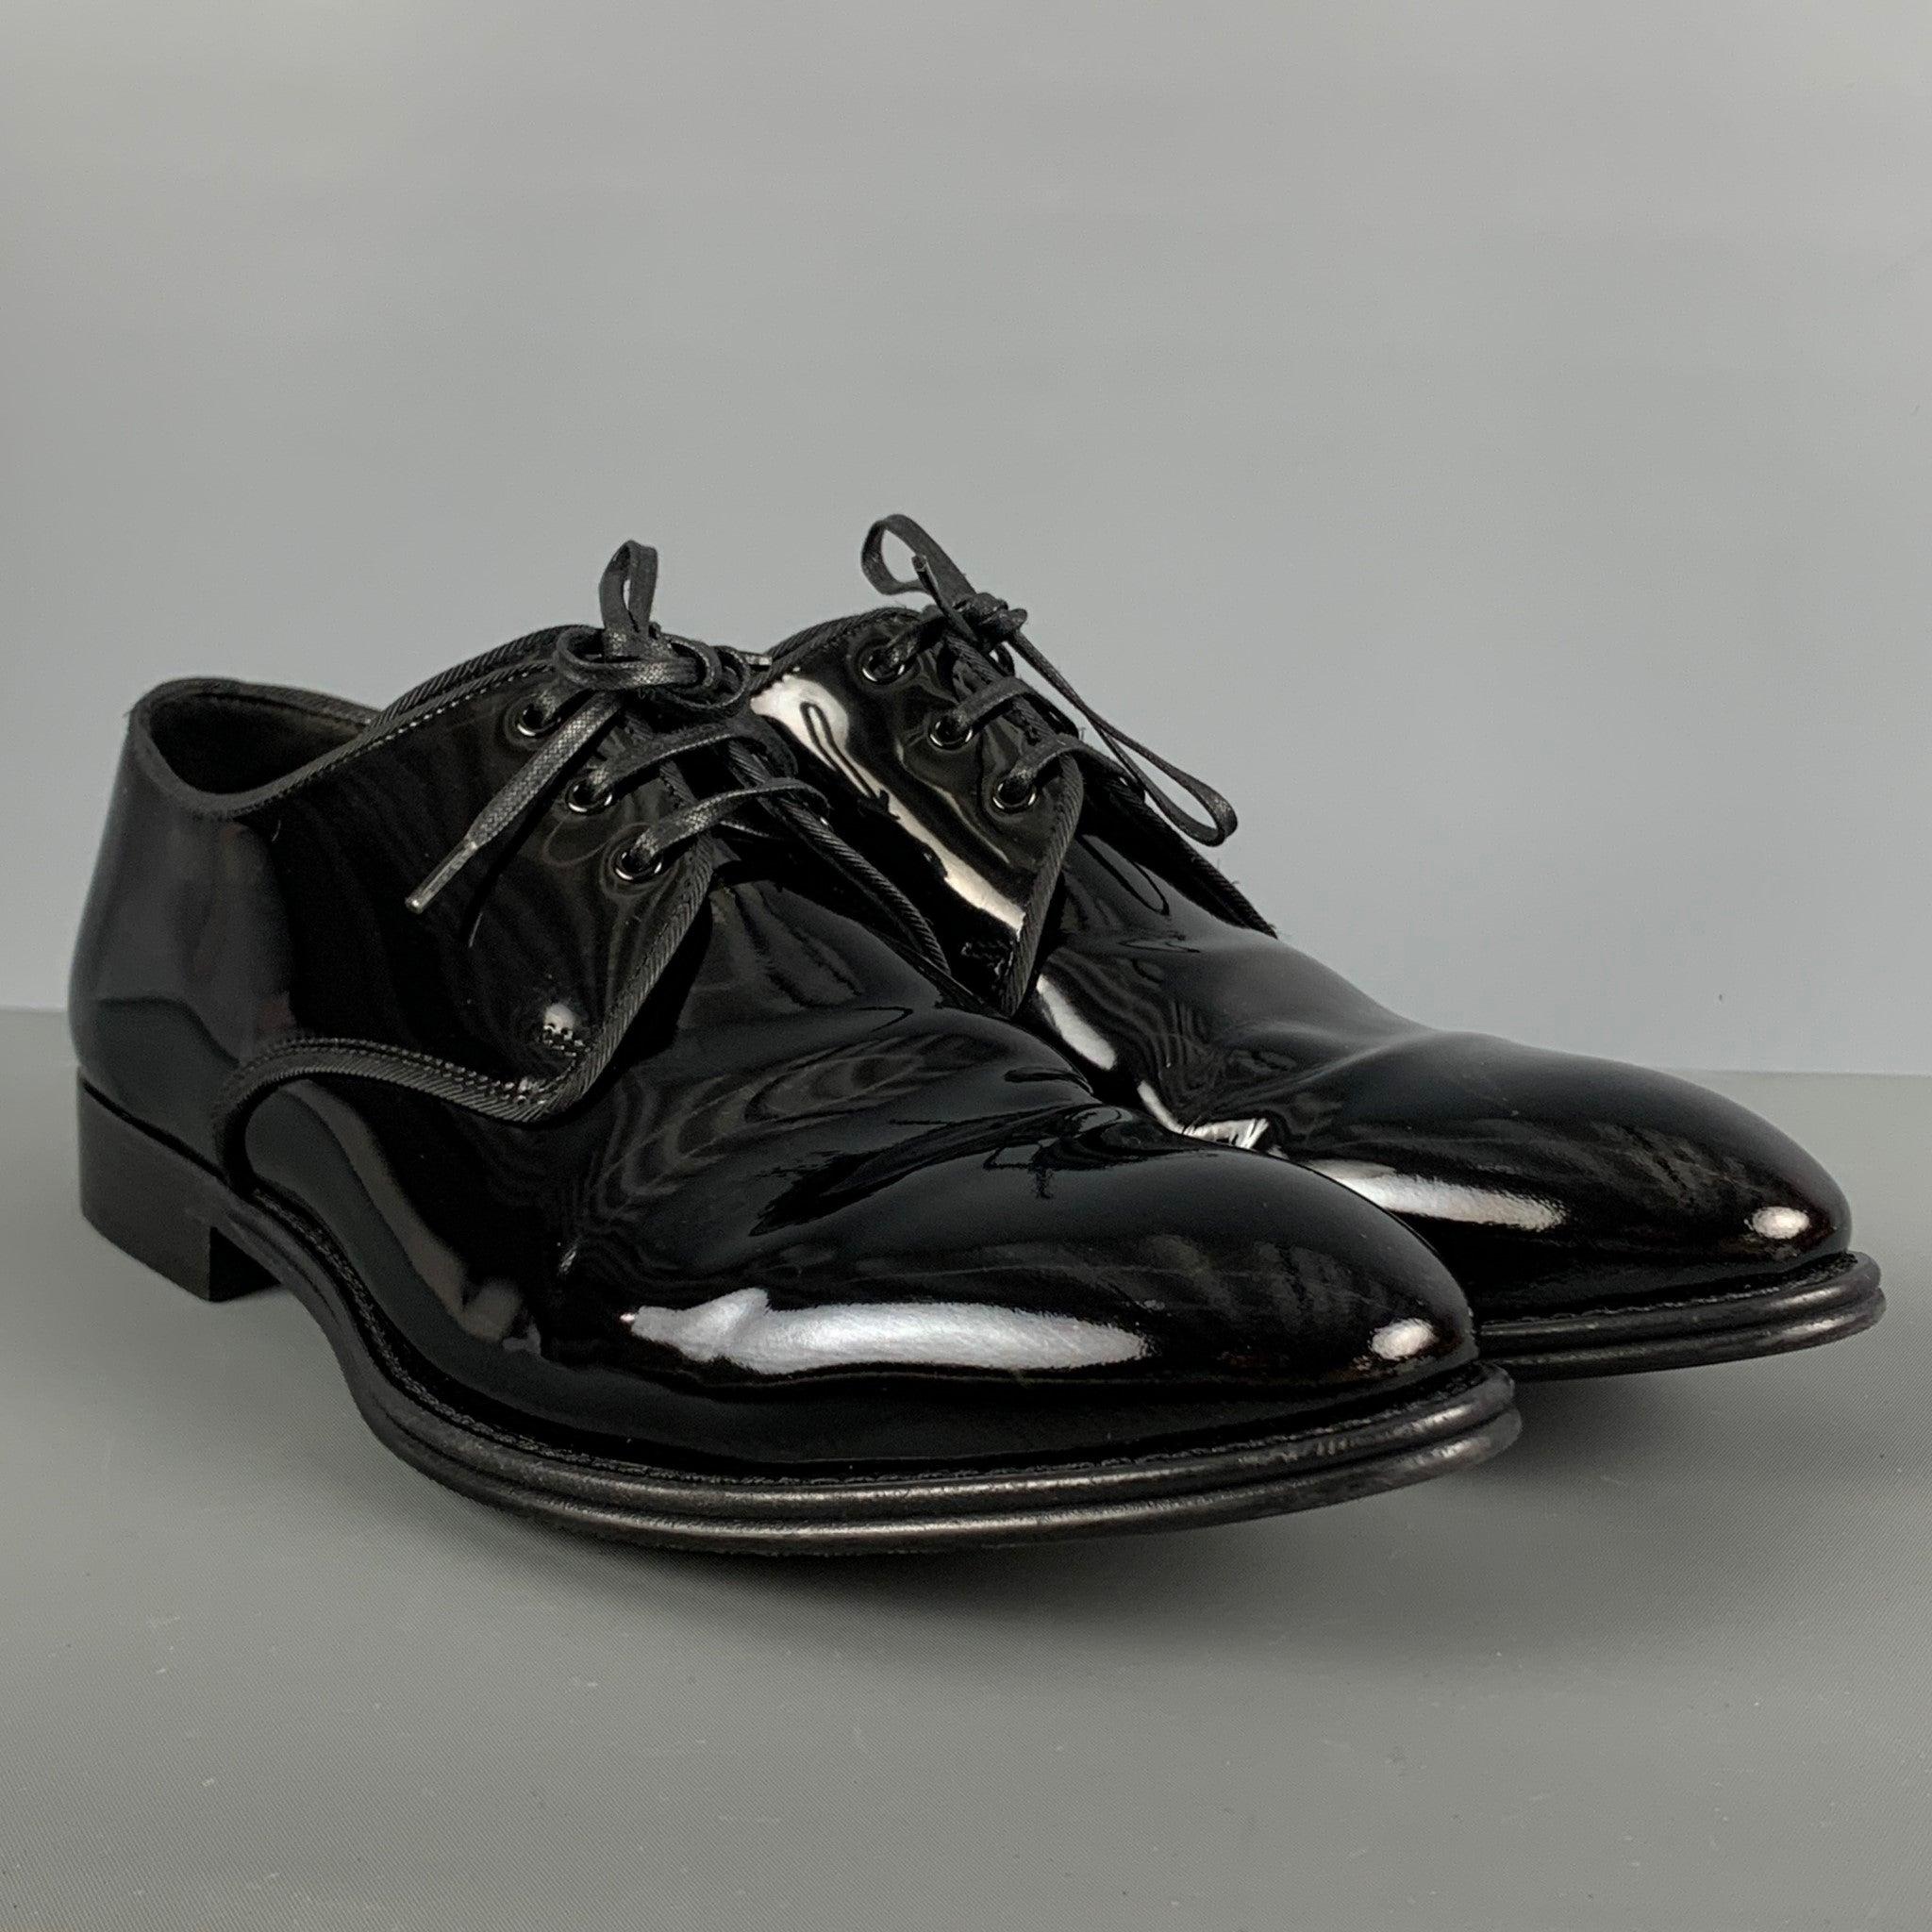 DOLCE & GABBANA shoes comes in a black patent leather featuring a classic style, pointed toe, and a lace up closure. Includes box. Made in Italy.Excellent Pre-Owned Condition. 

Marked:   A10158 7 1/2Outsole: 12 inches  x 4.5 in
  
  
 
Reference: